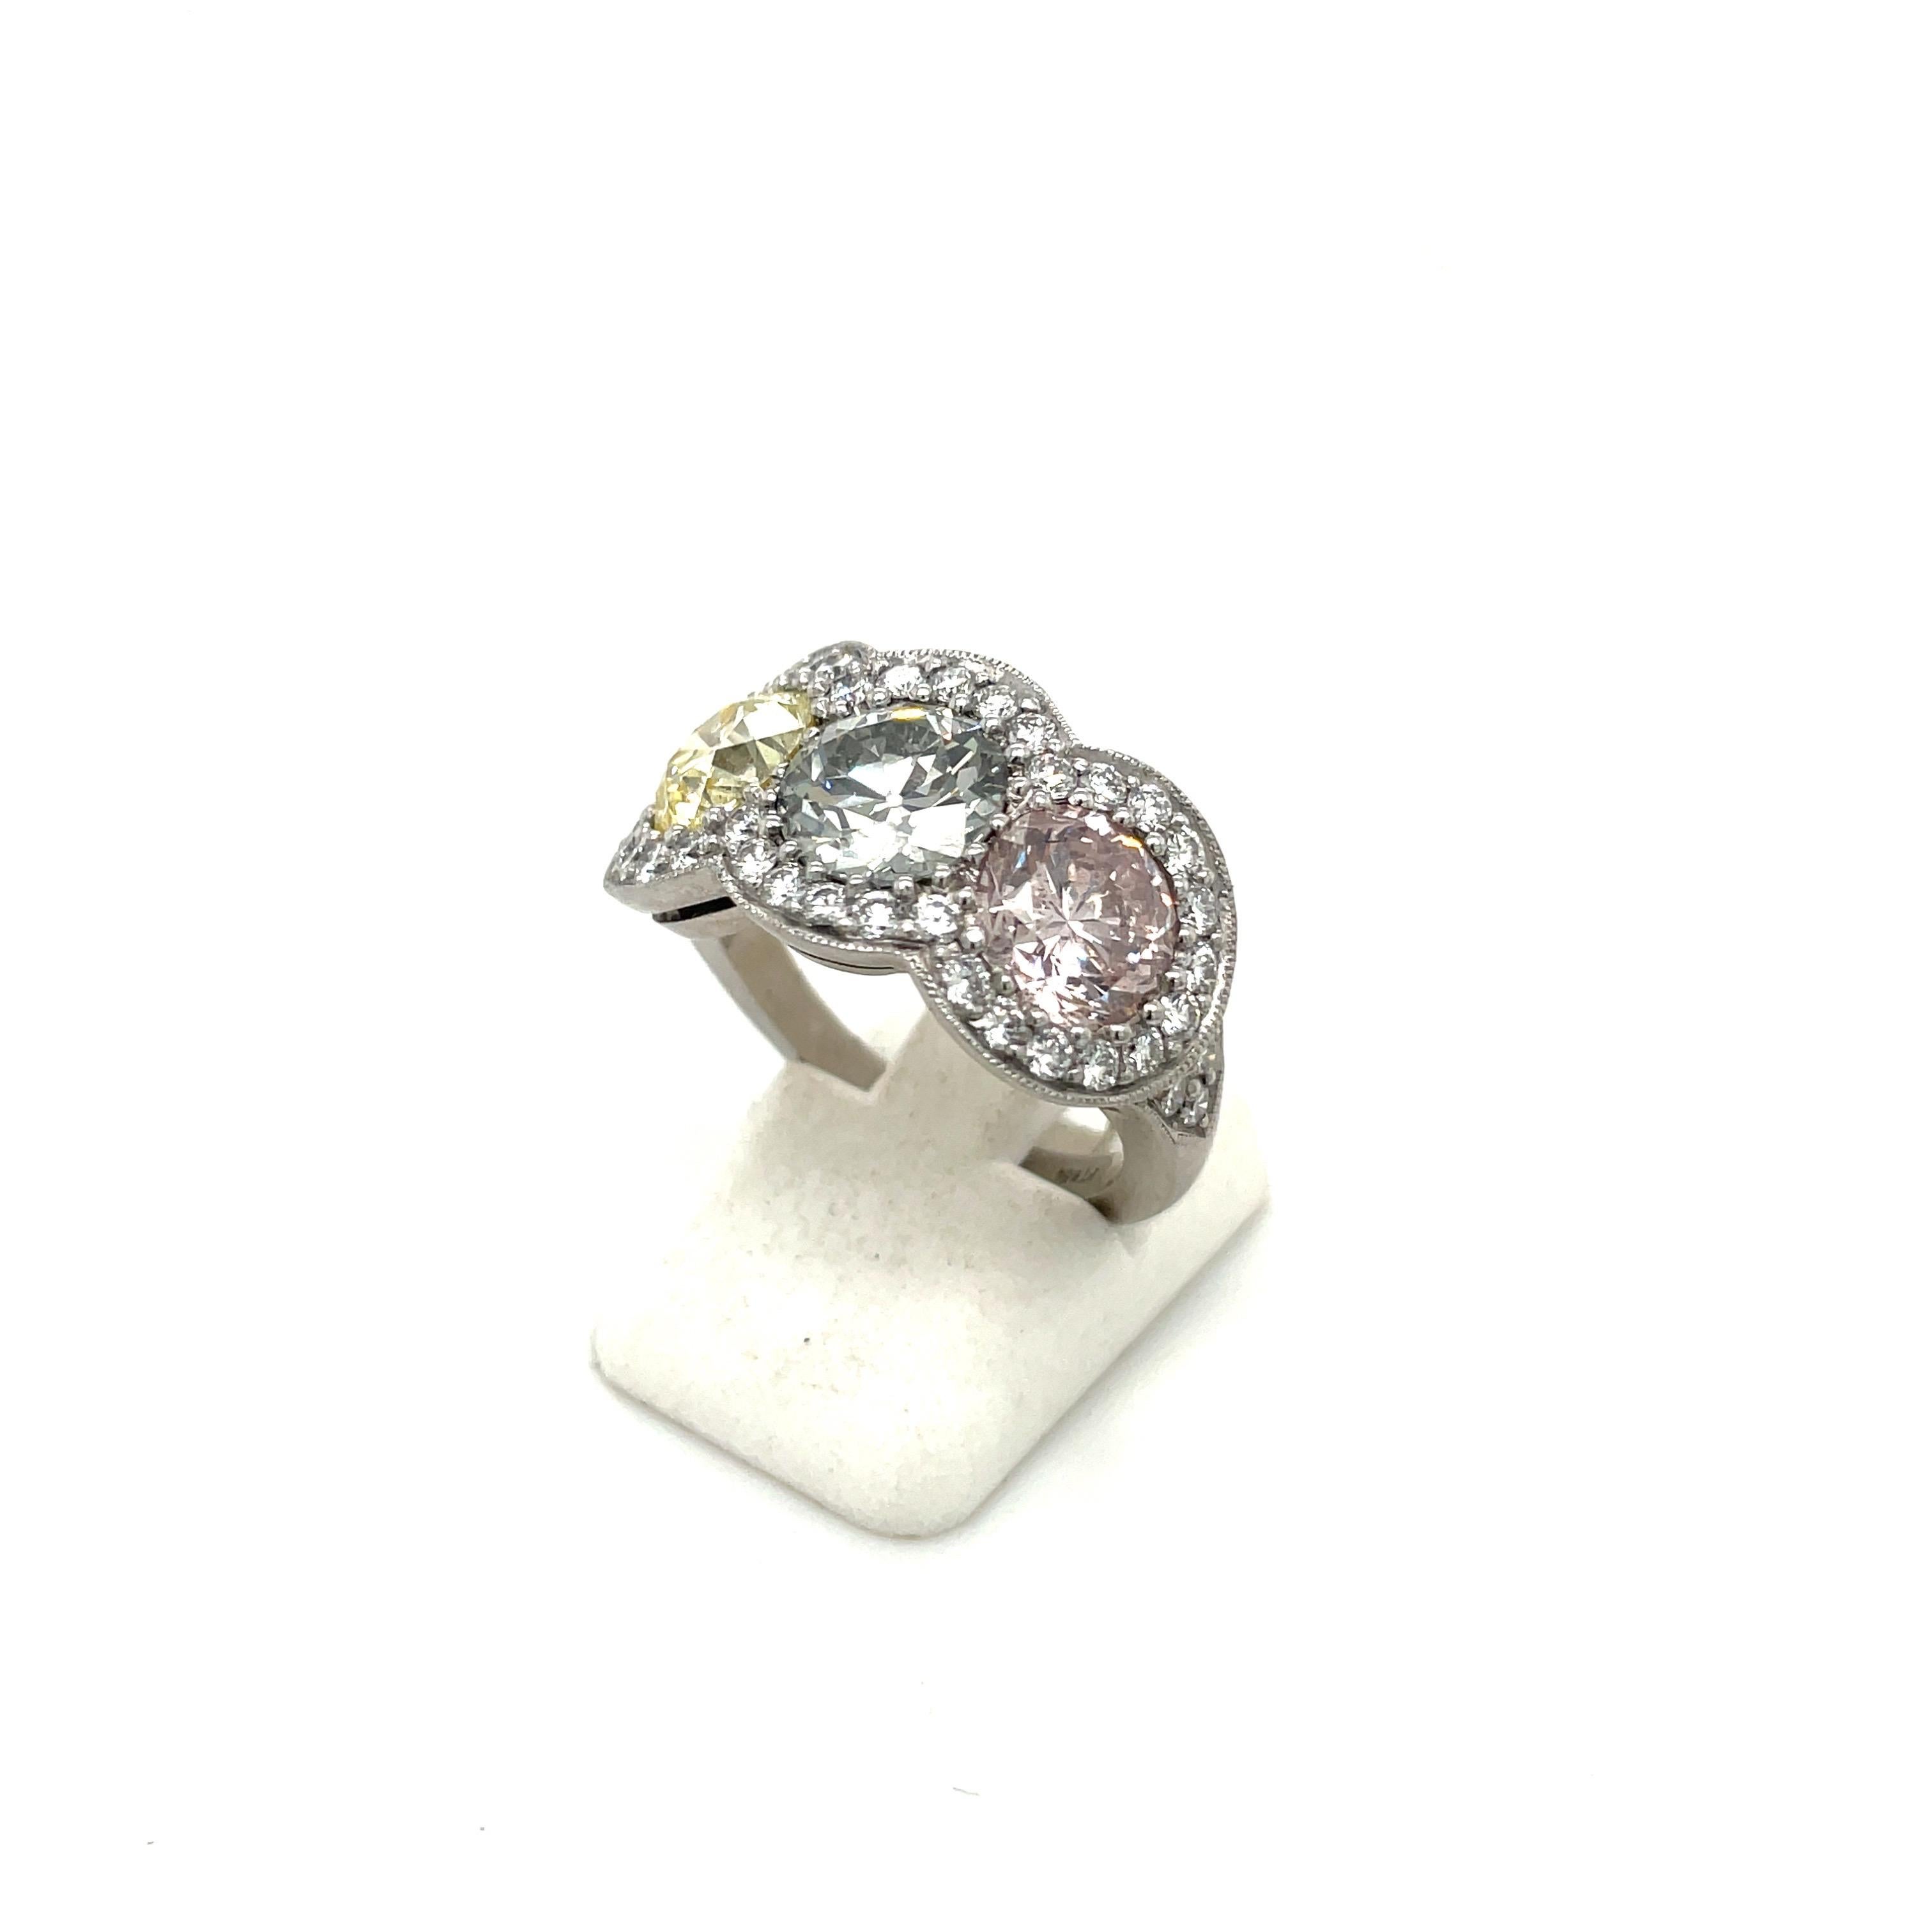 Cellini Plat Fancy Colored 1.43Ct Pink 1.34Ct Yellow 1.53Ct Grey Diamond Ring For Sale 2